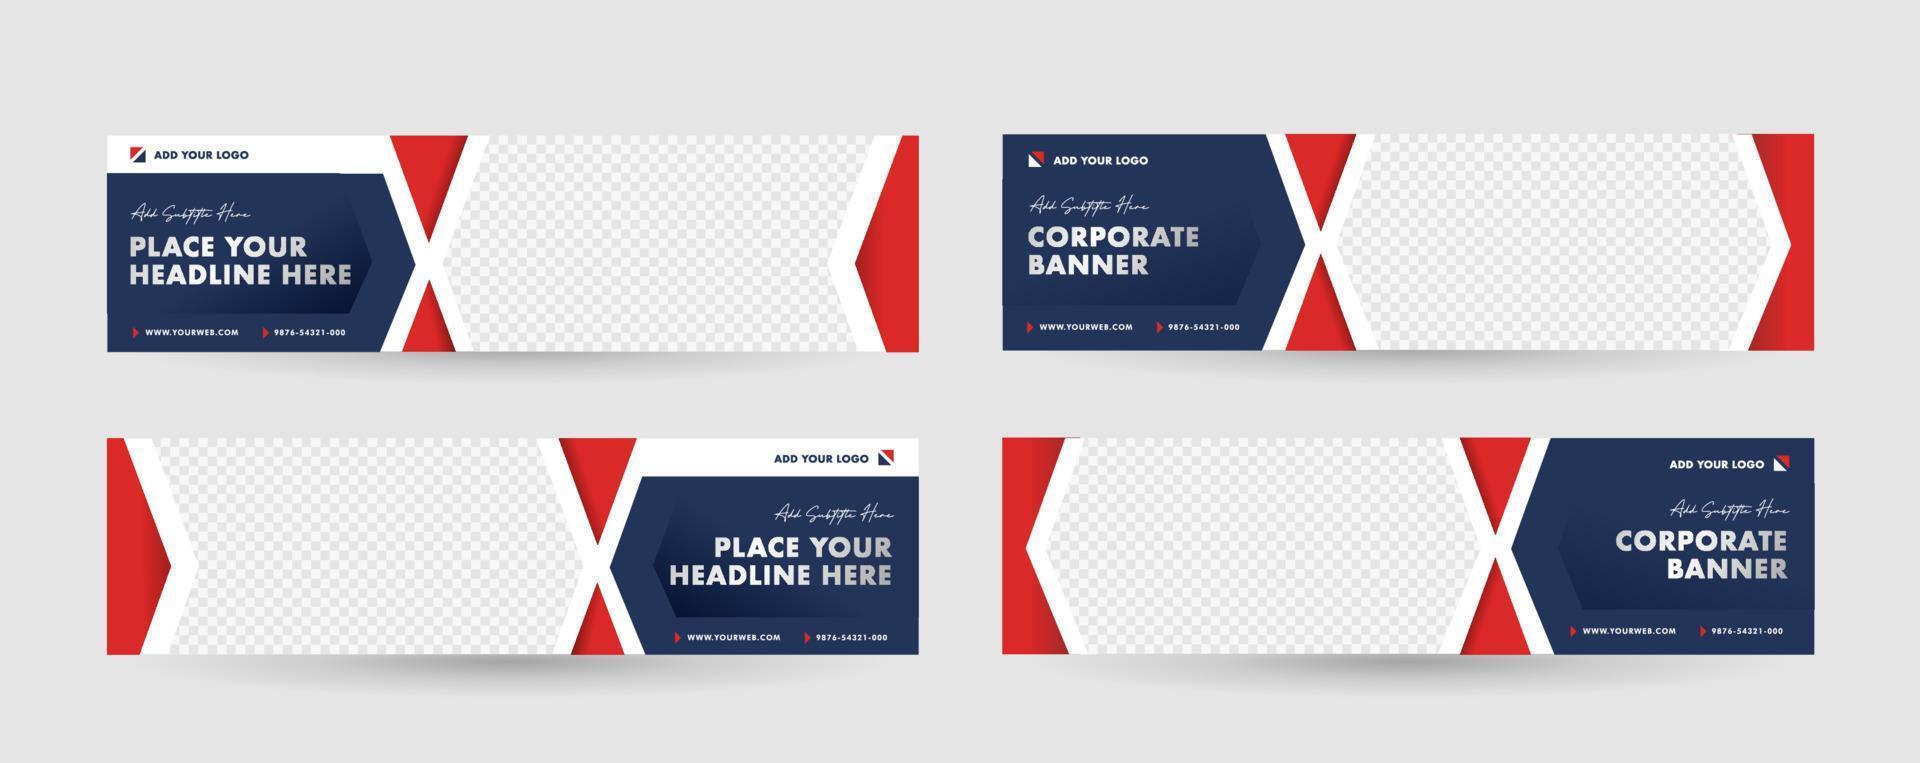 Blue navy color with red accent horizontal banner template, triangles and cross lines element make the banner feels Strong, Solid and Modern. vector